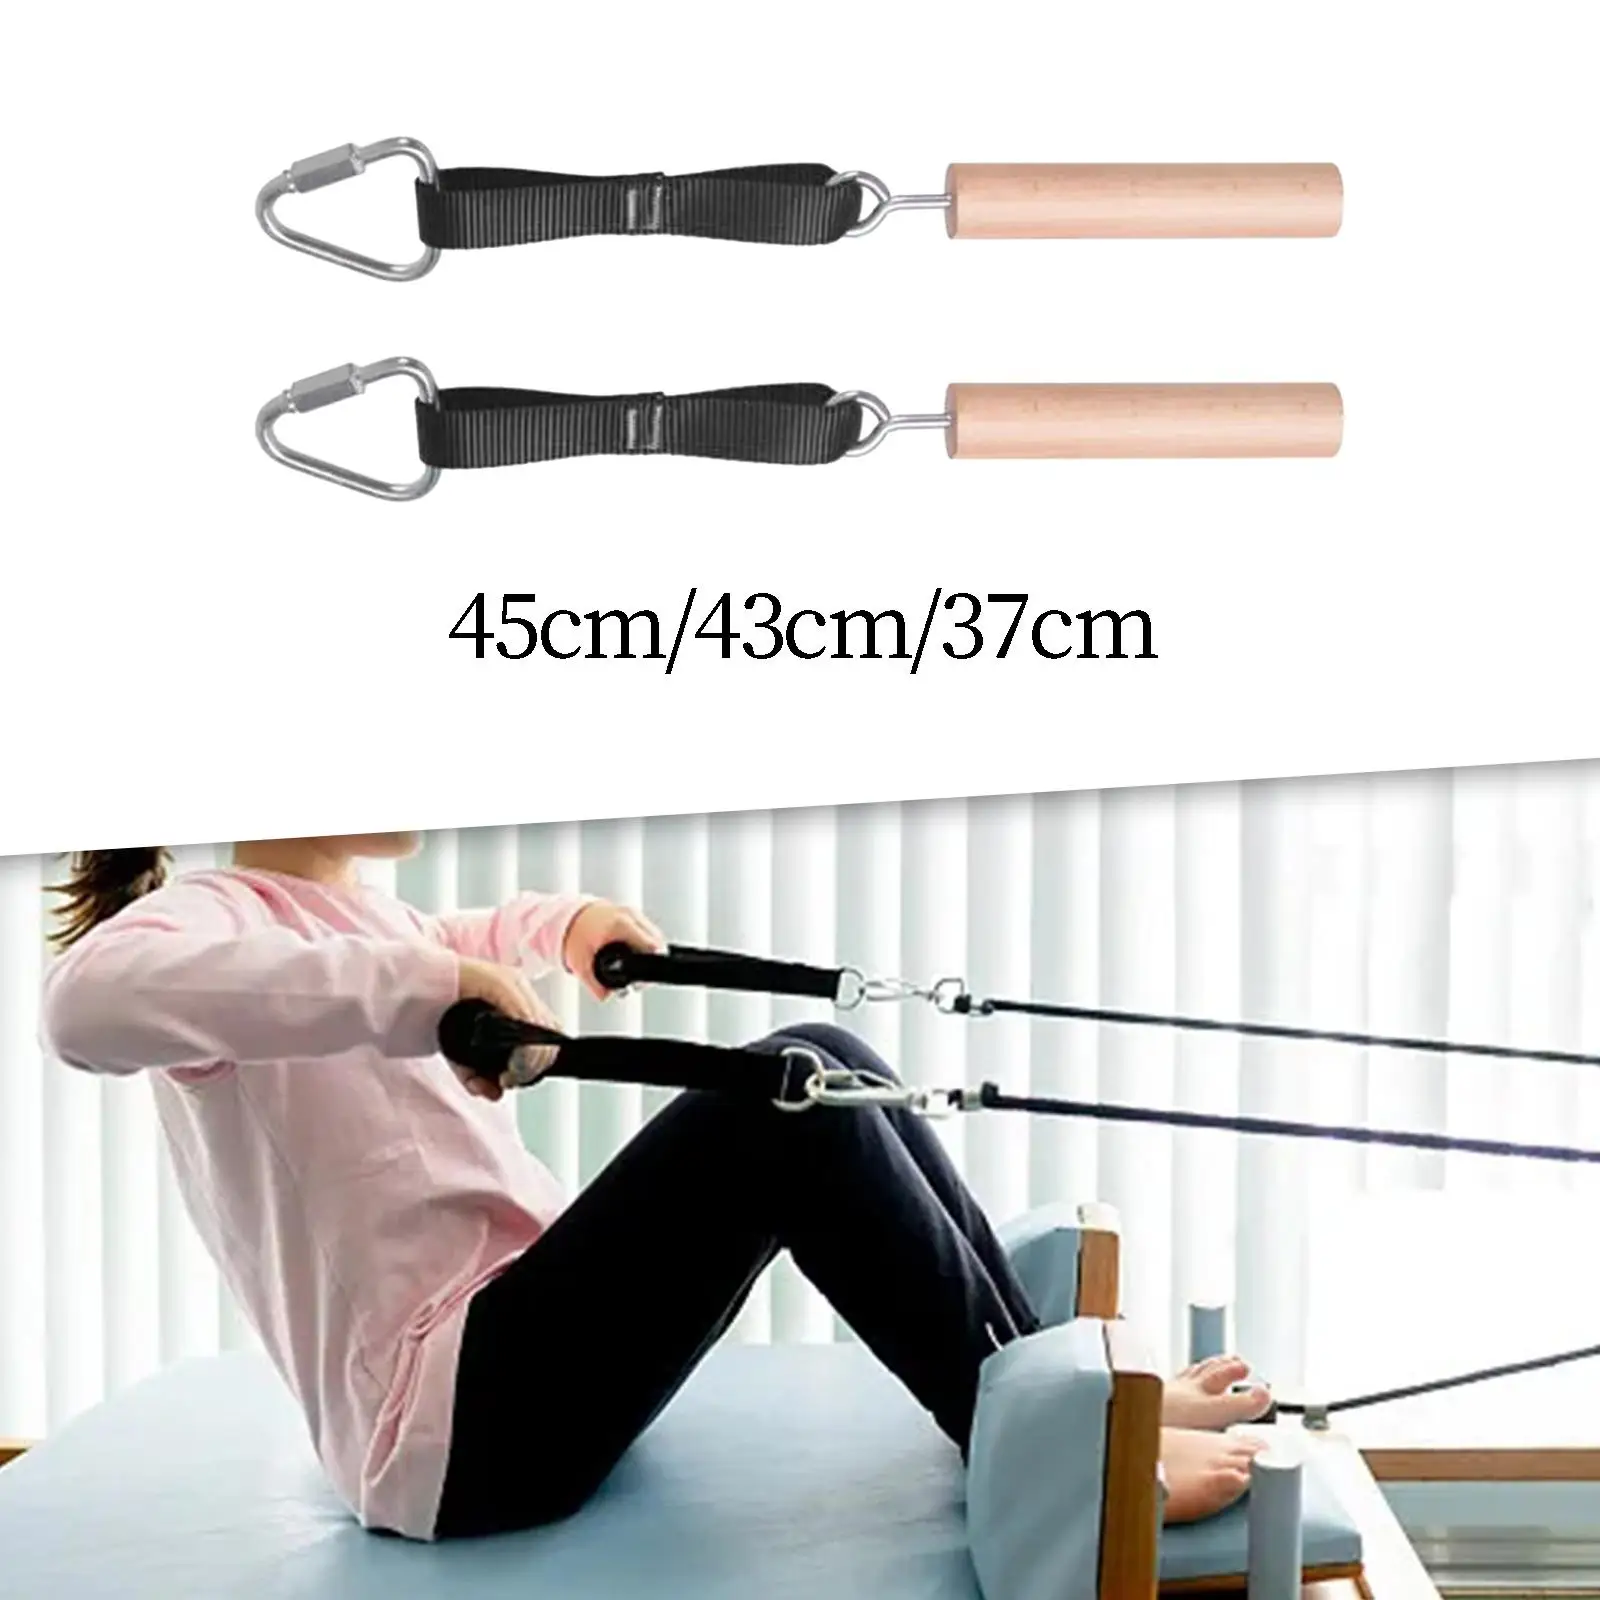 2Pcs Pull up Handles Grips Exercise Handle with Straps Training Tool Strength